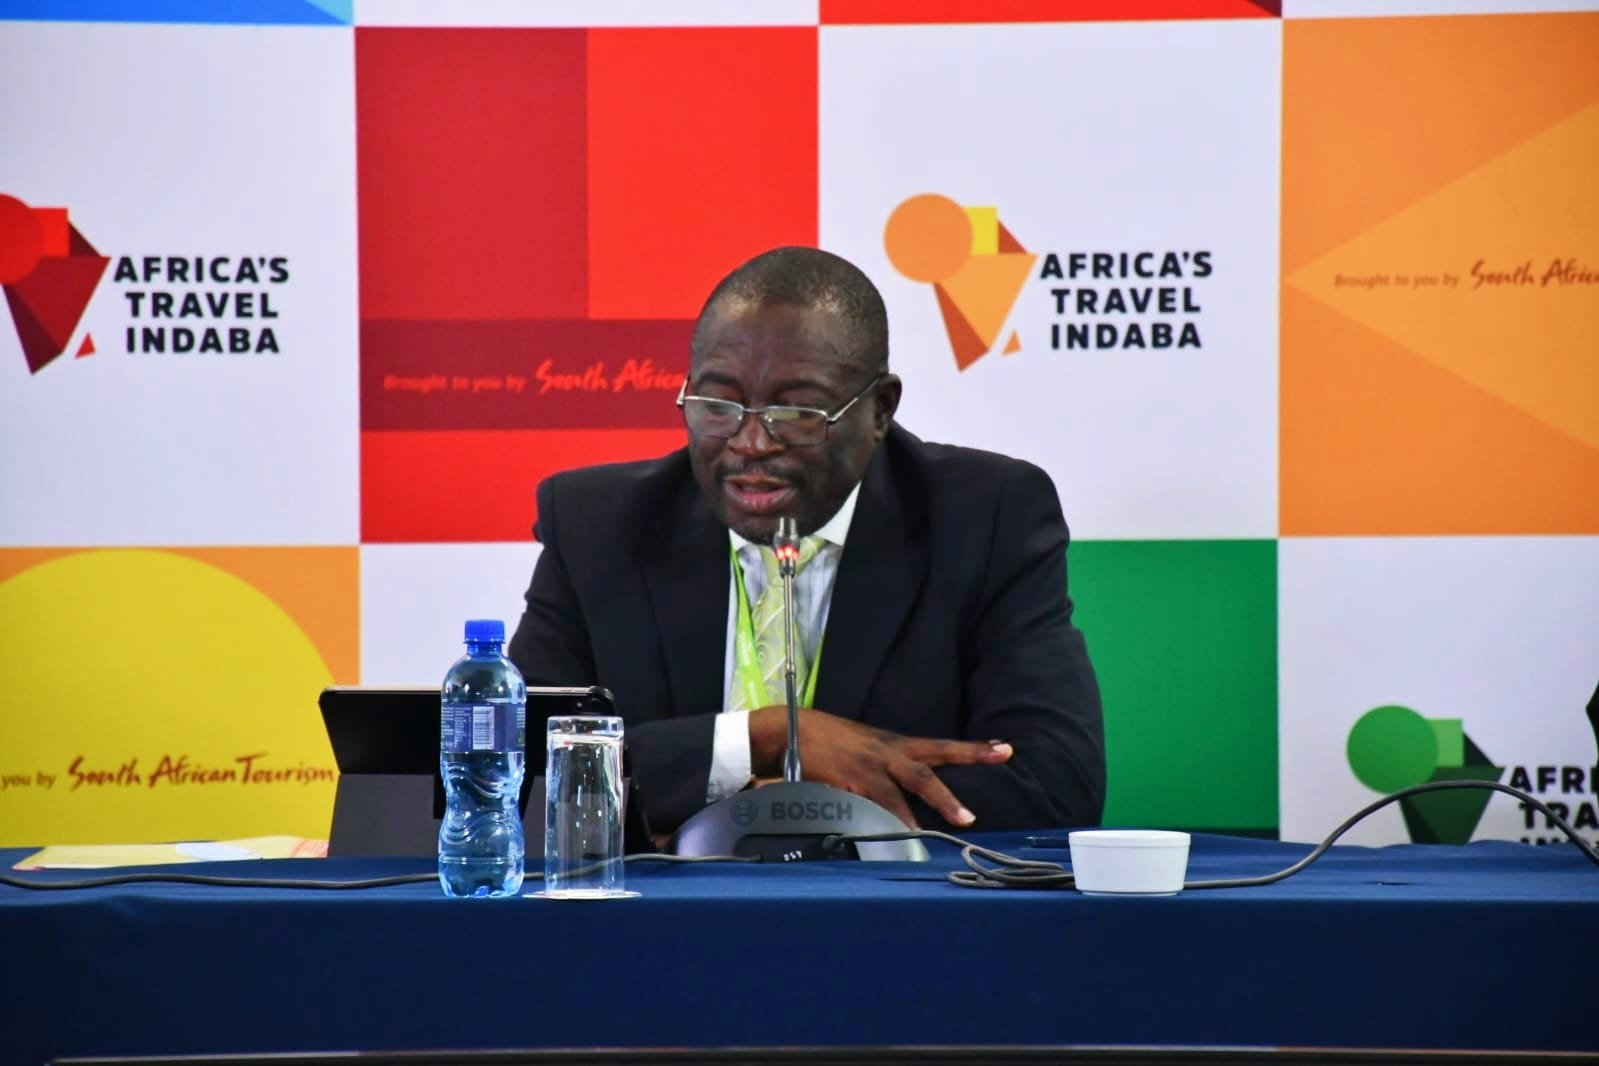 Remarks by Deputy Minister Fish Mahlalela at the Connection Session on TGCSA’s Basic Quality Verification (BQV) Programme